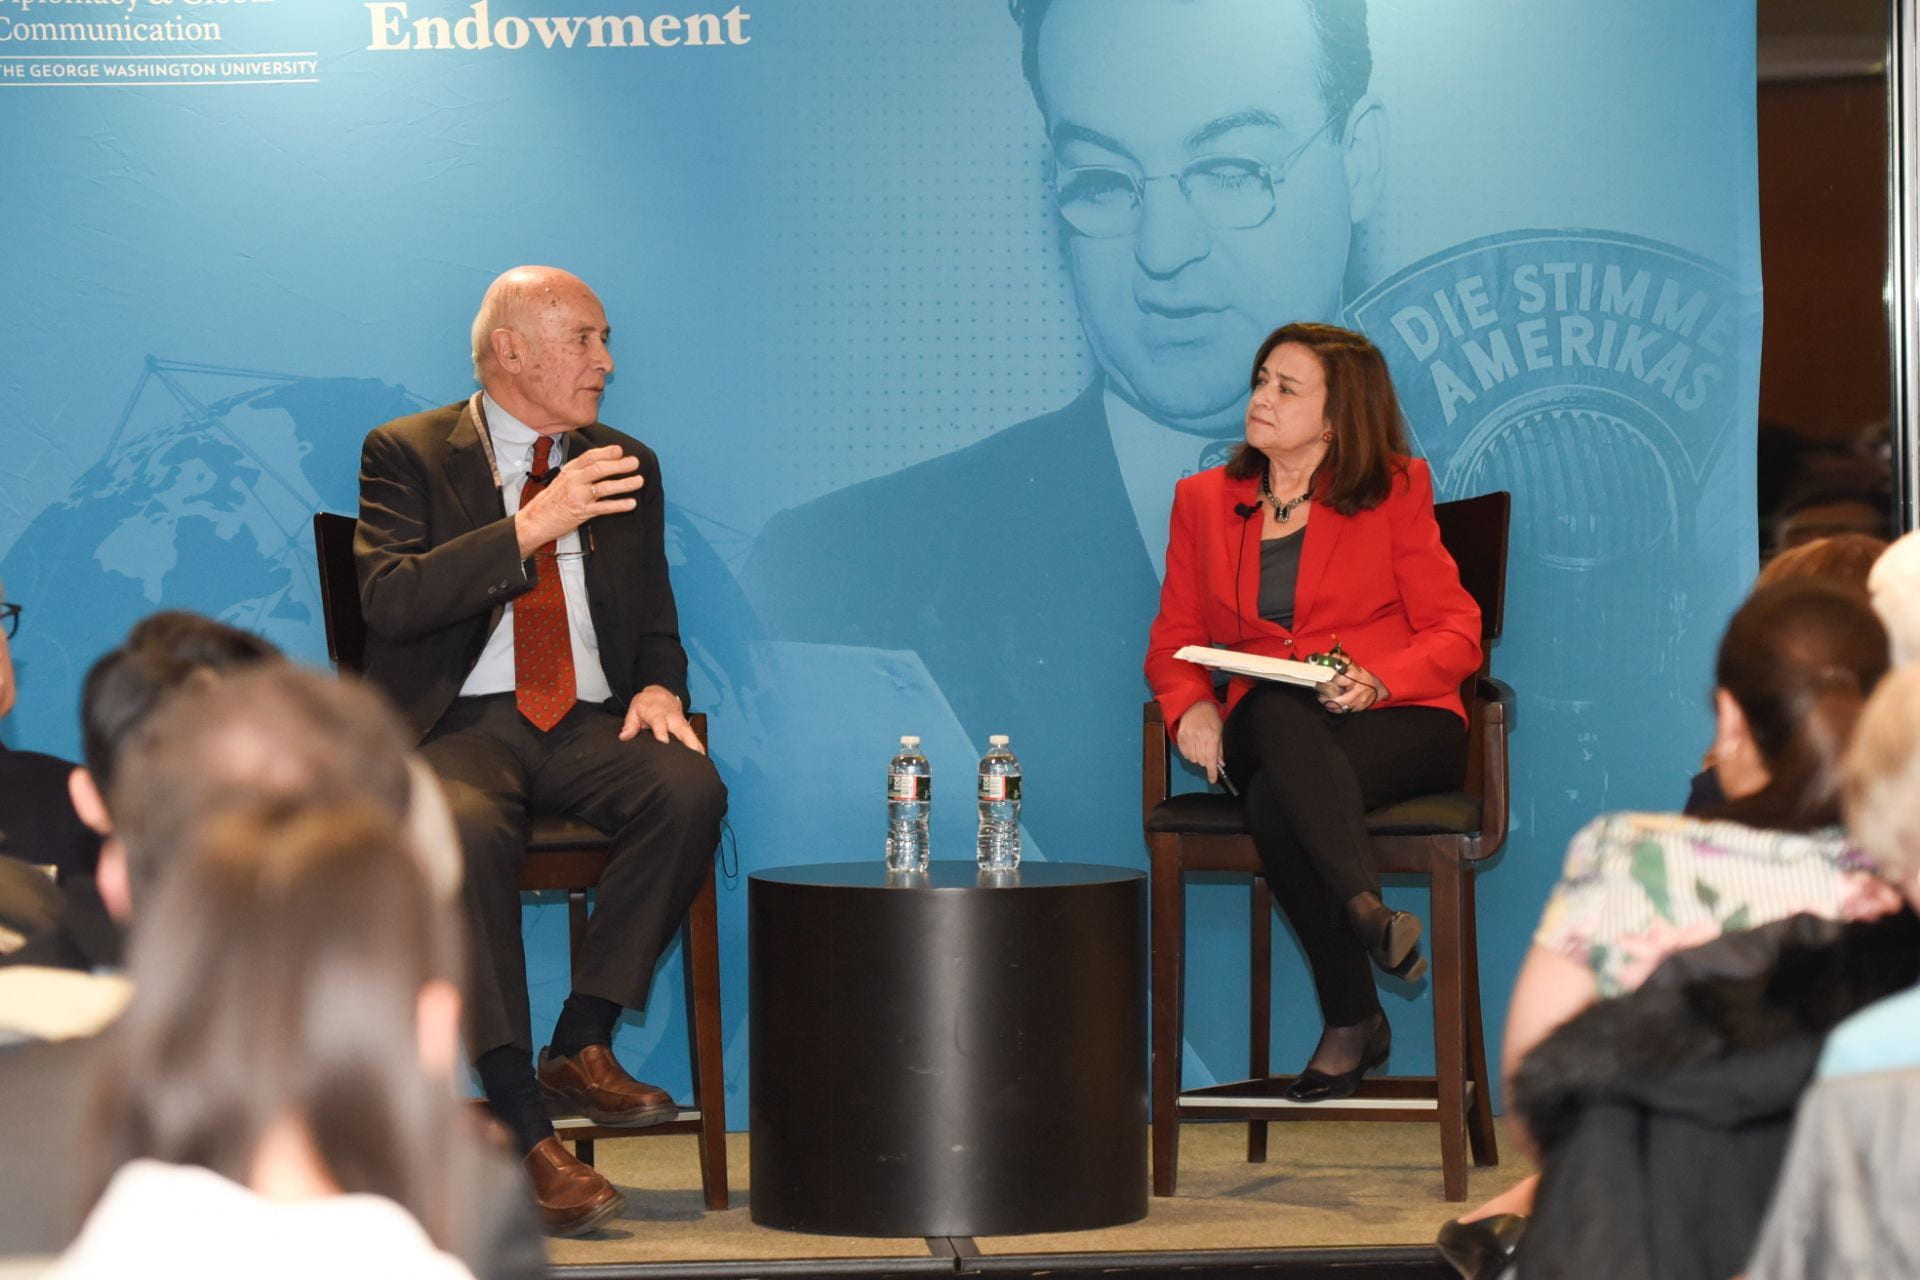 Joseph S. Nye and Tara Sonenshine at the Walter Roberts Lecture. Photo by Sydney Elle Gray/GW Photos